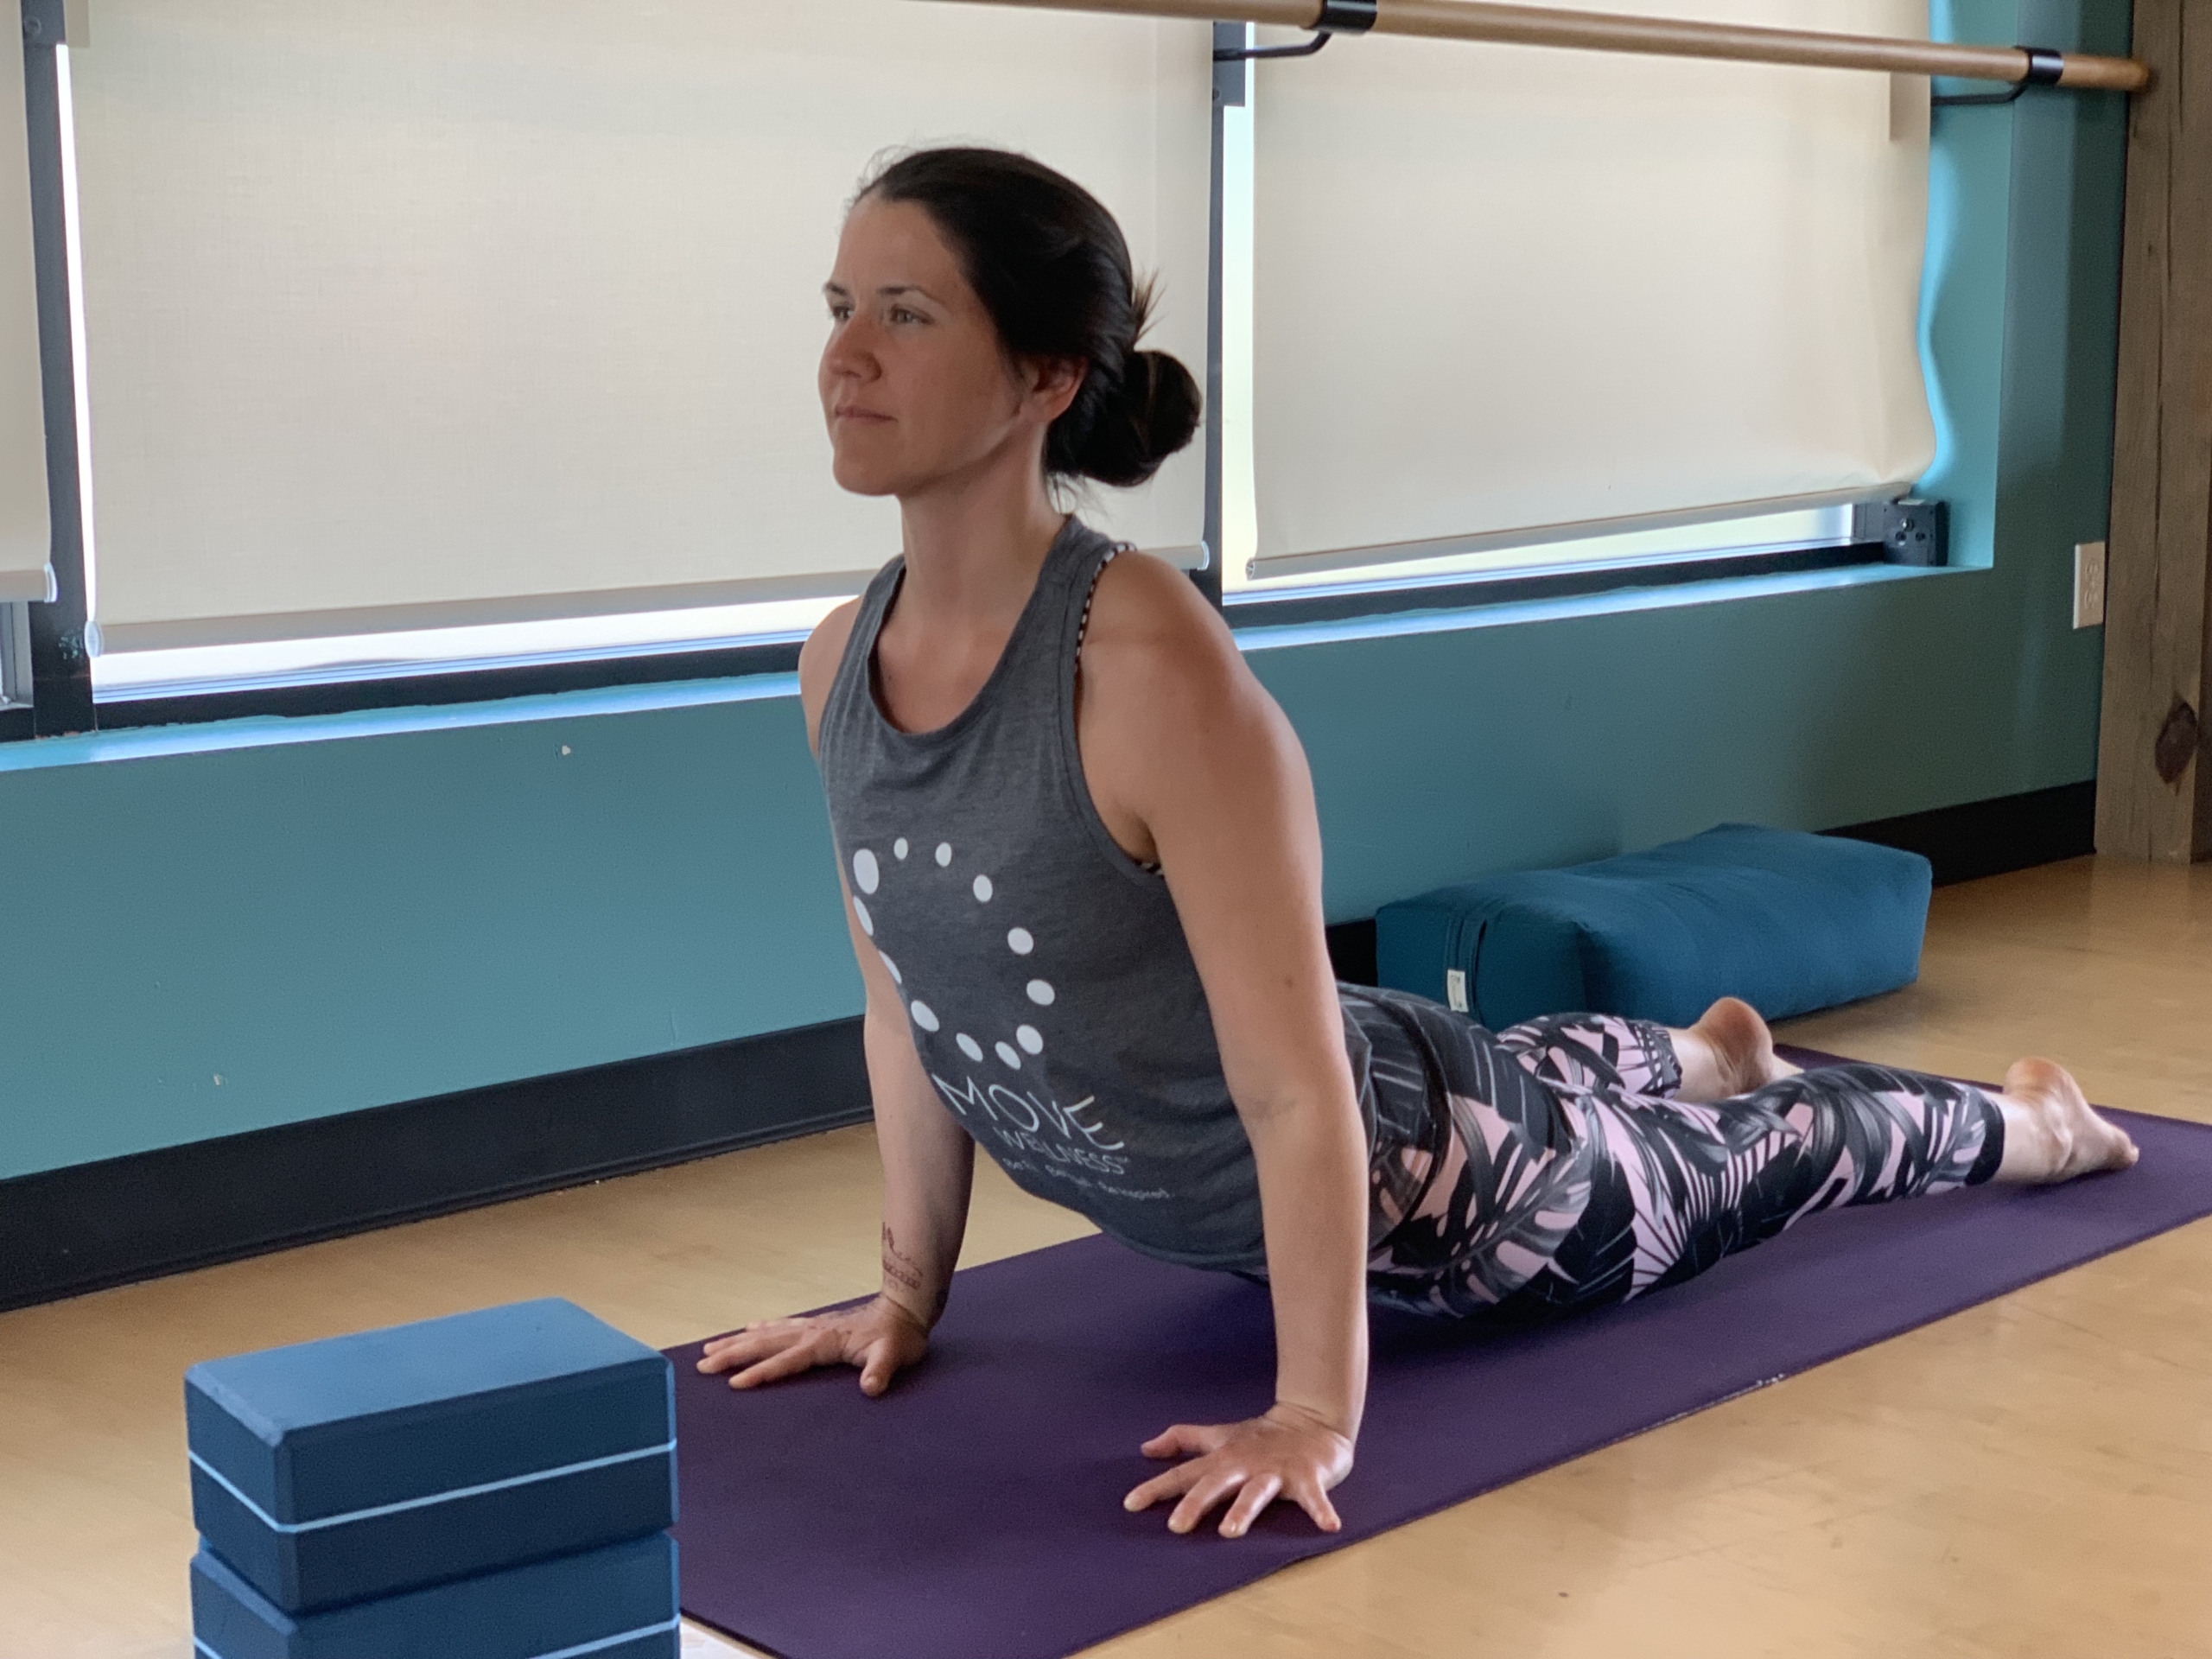 Yoga Teacher showing us how to be heart healthy by managing stress